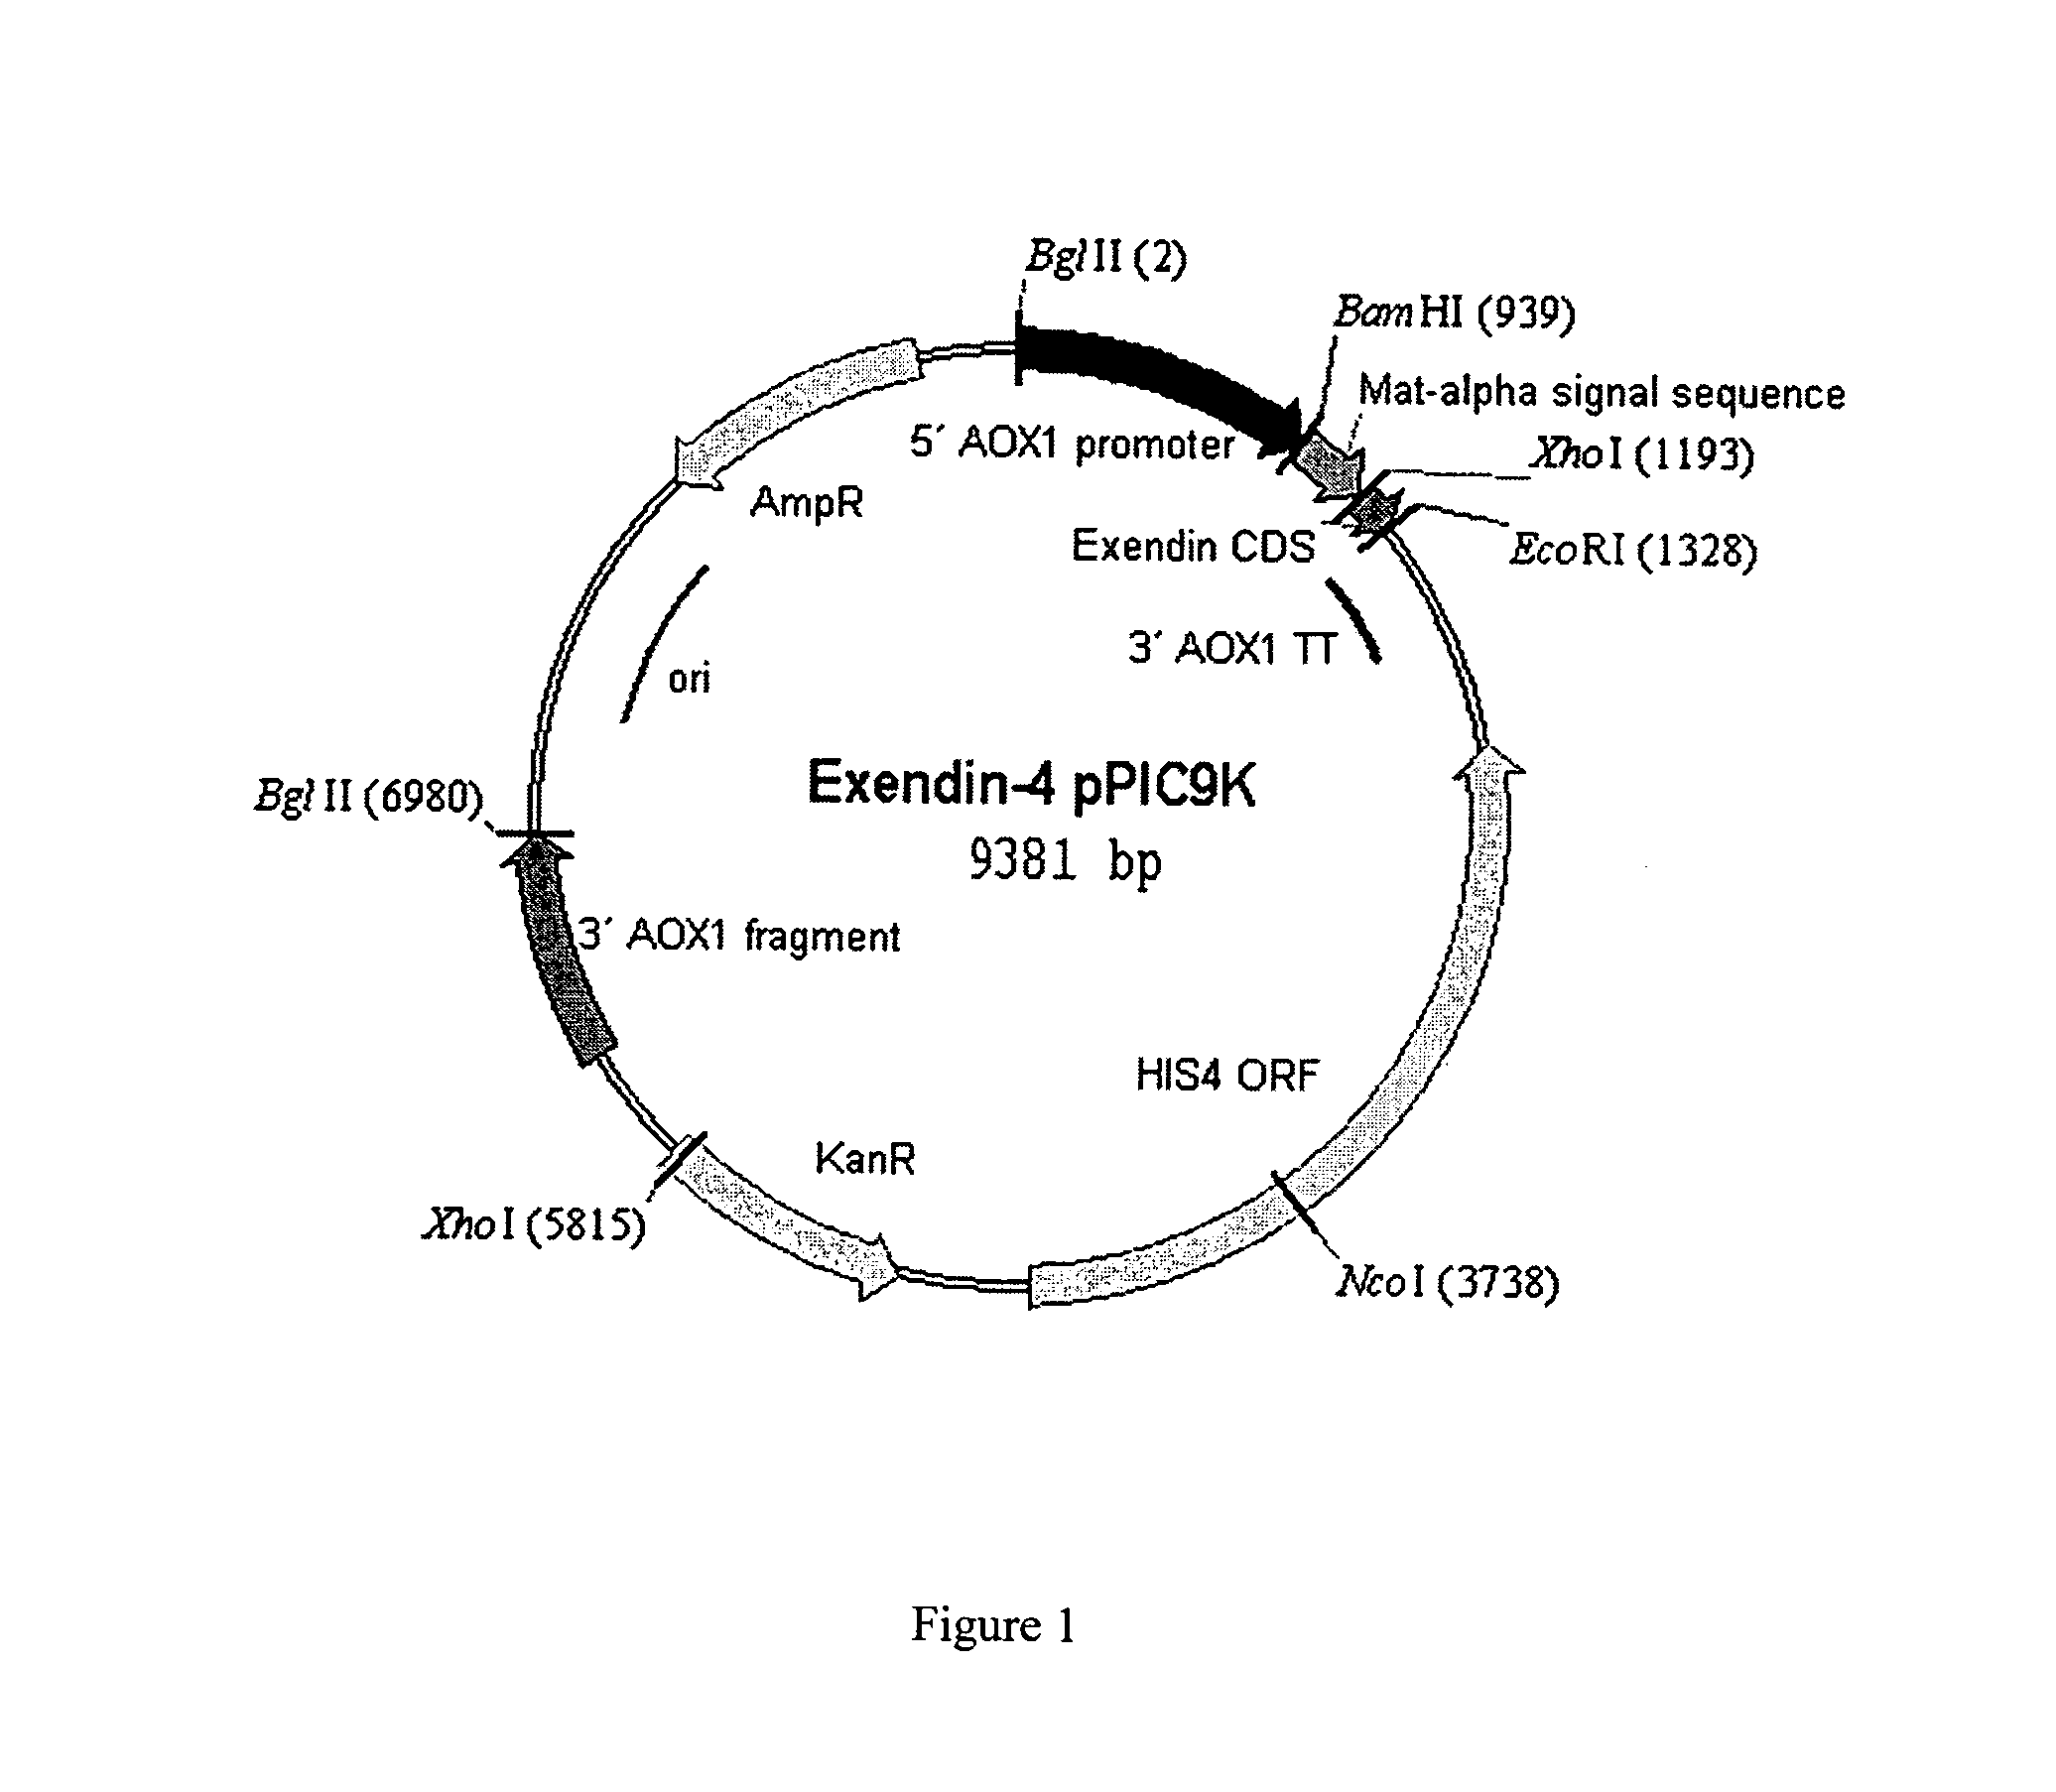 Method of producing biologically active polypeptide having insulinotropic activity